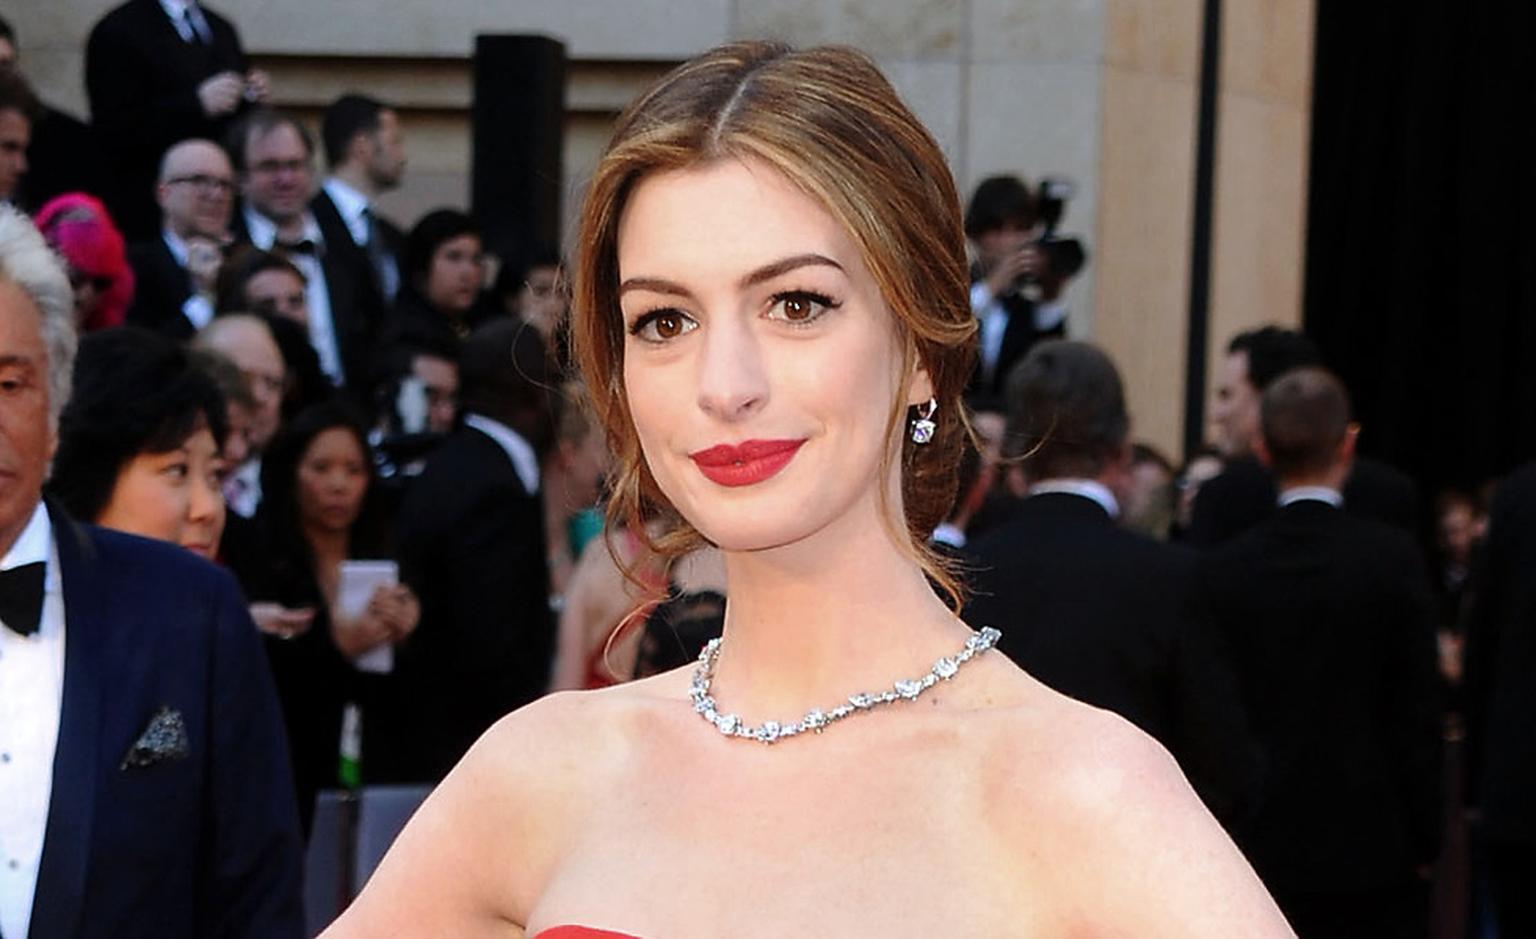 ANNE HATHAWAY who presented the Academy Awards wore the Tiffany Lucida Star necklace valued at 10 million dollars and a $285,000 Tiffany Legacy diamond ring and Tiffany Novo 10 carat diamond earrings on the red carpet.